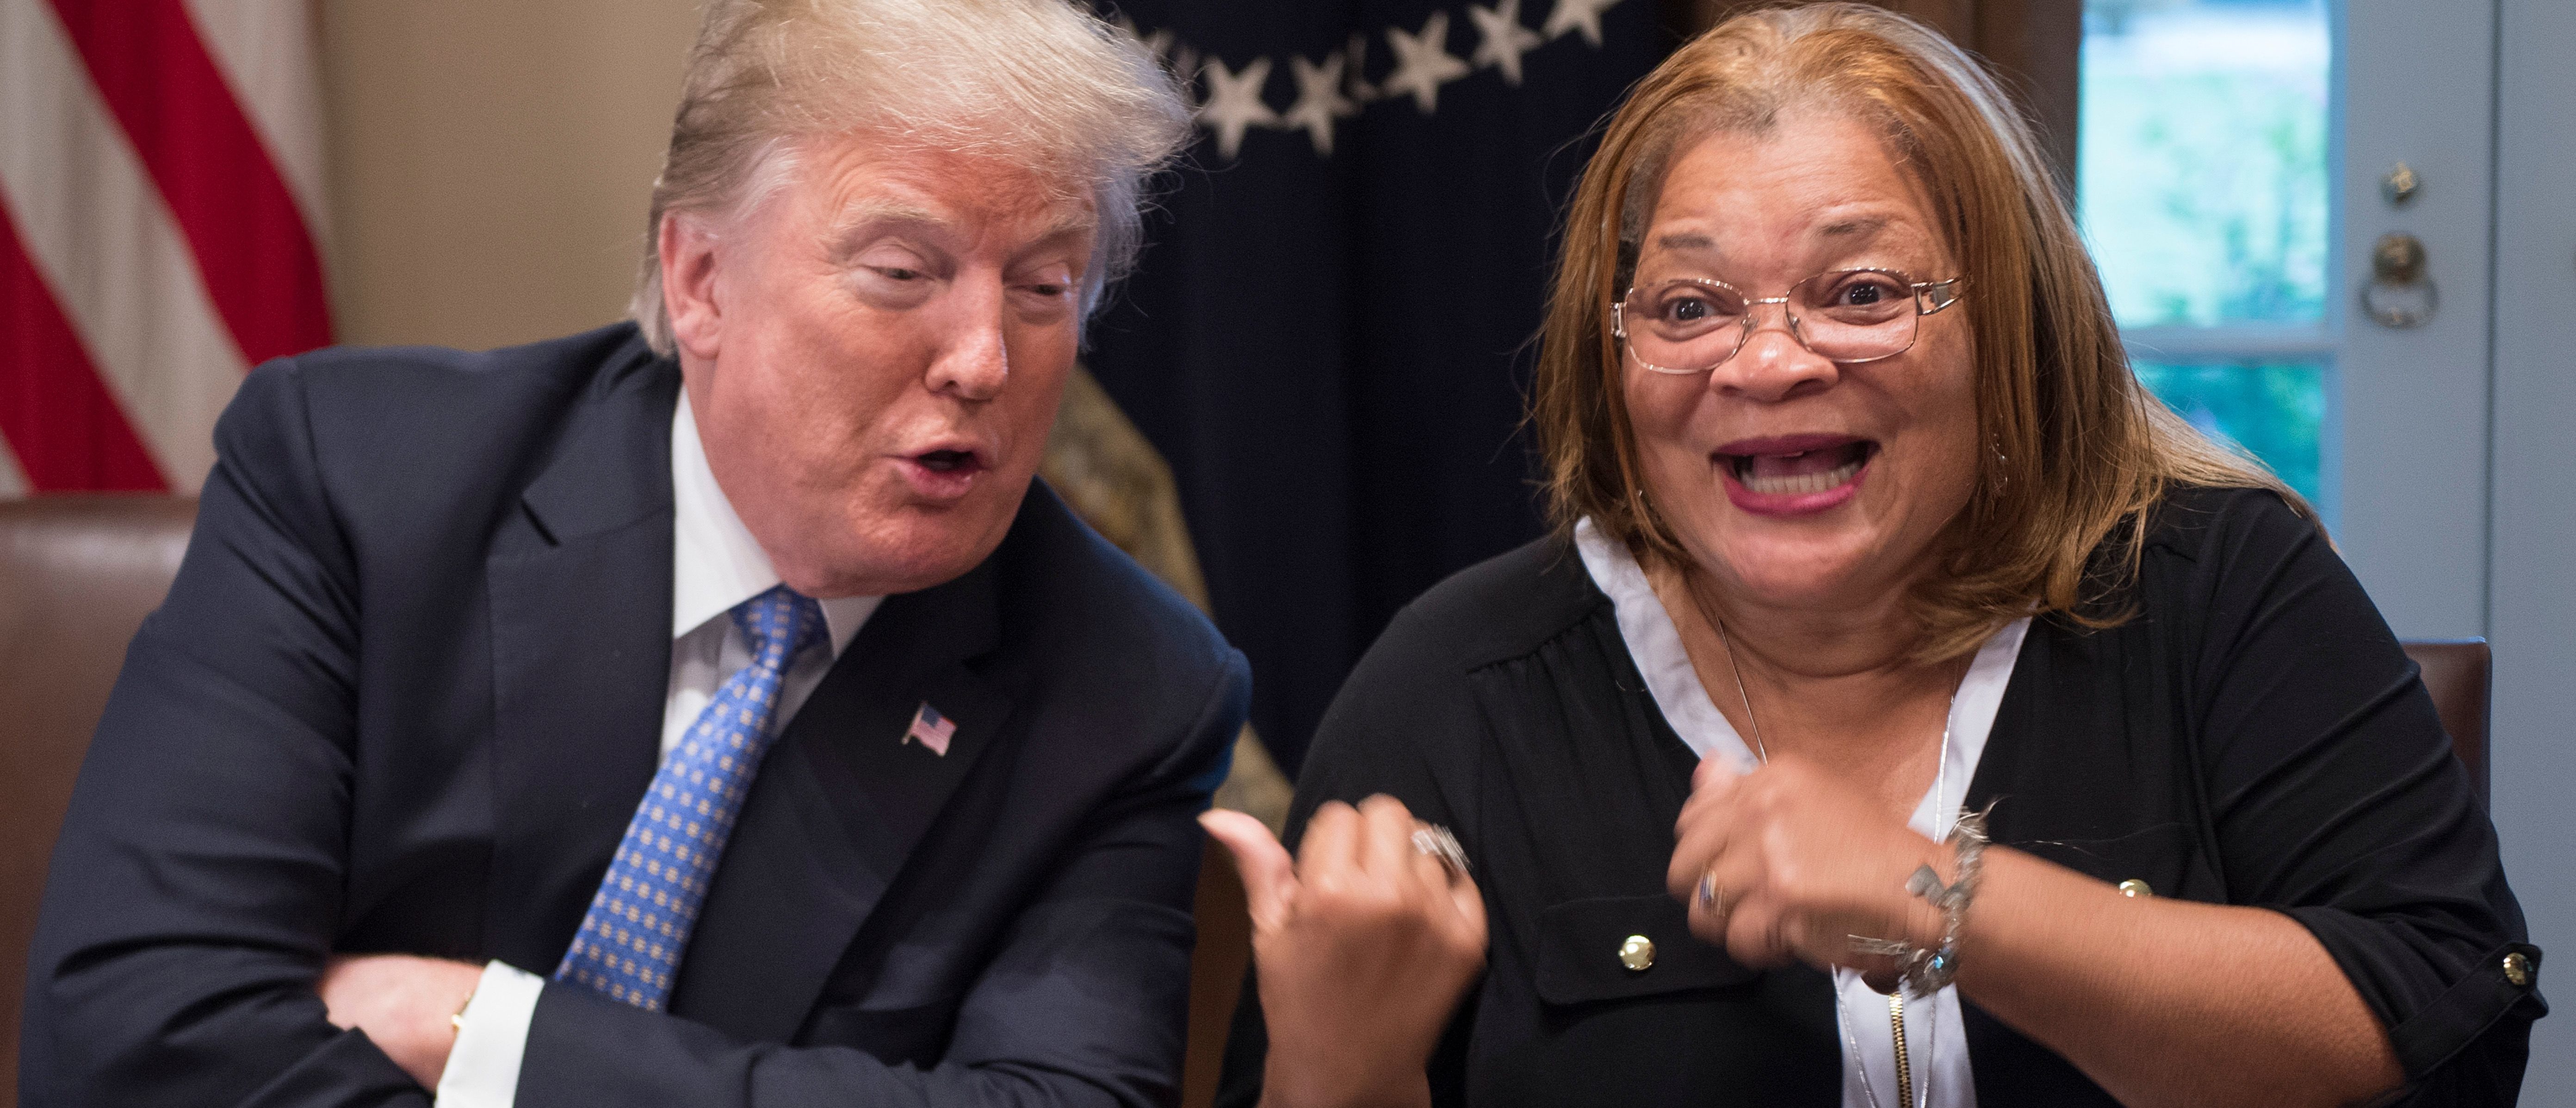 TOPSHOT - US President Donald Trump responds to Dr. Alveda King, niece of Dr. Martin Luther King Jr., during a meeting with inner city pastors at the White House in Washington, DC,on August 1, 2018. - President Trump delivered remarks at the roundtable discussion with several inner city pastors, and discussed the Administrations efforts on prison reform and other policy initiatives to improve Americans in inner cities. (Photo by Jim WATSON / AFP) (Photo credit should read JIM WATSON/AFP/Getty Images)